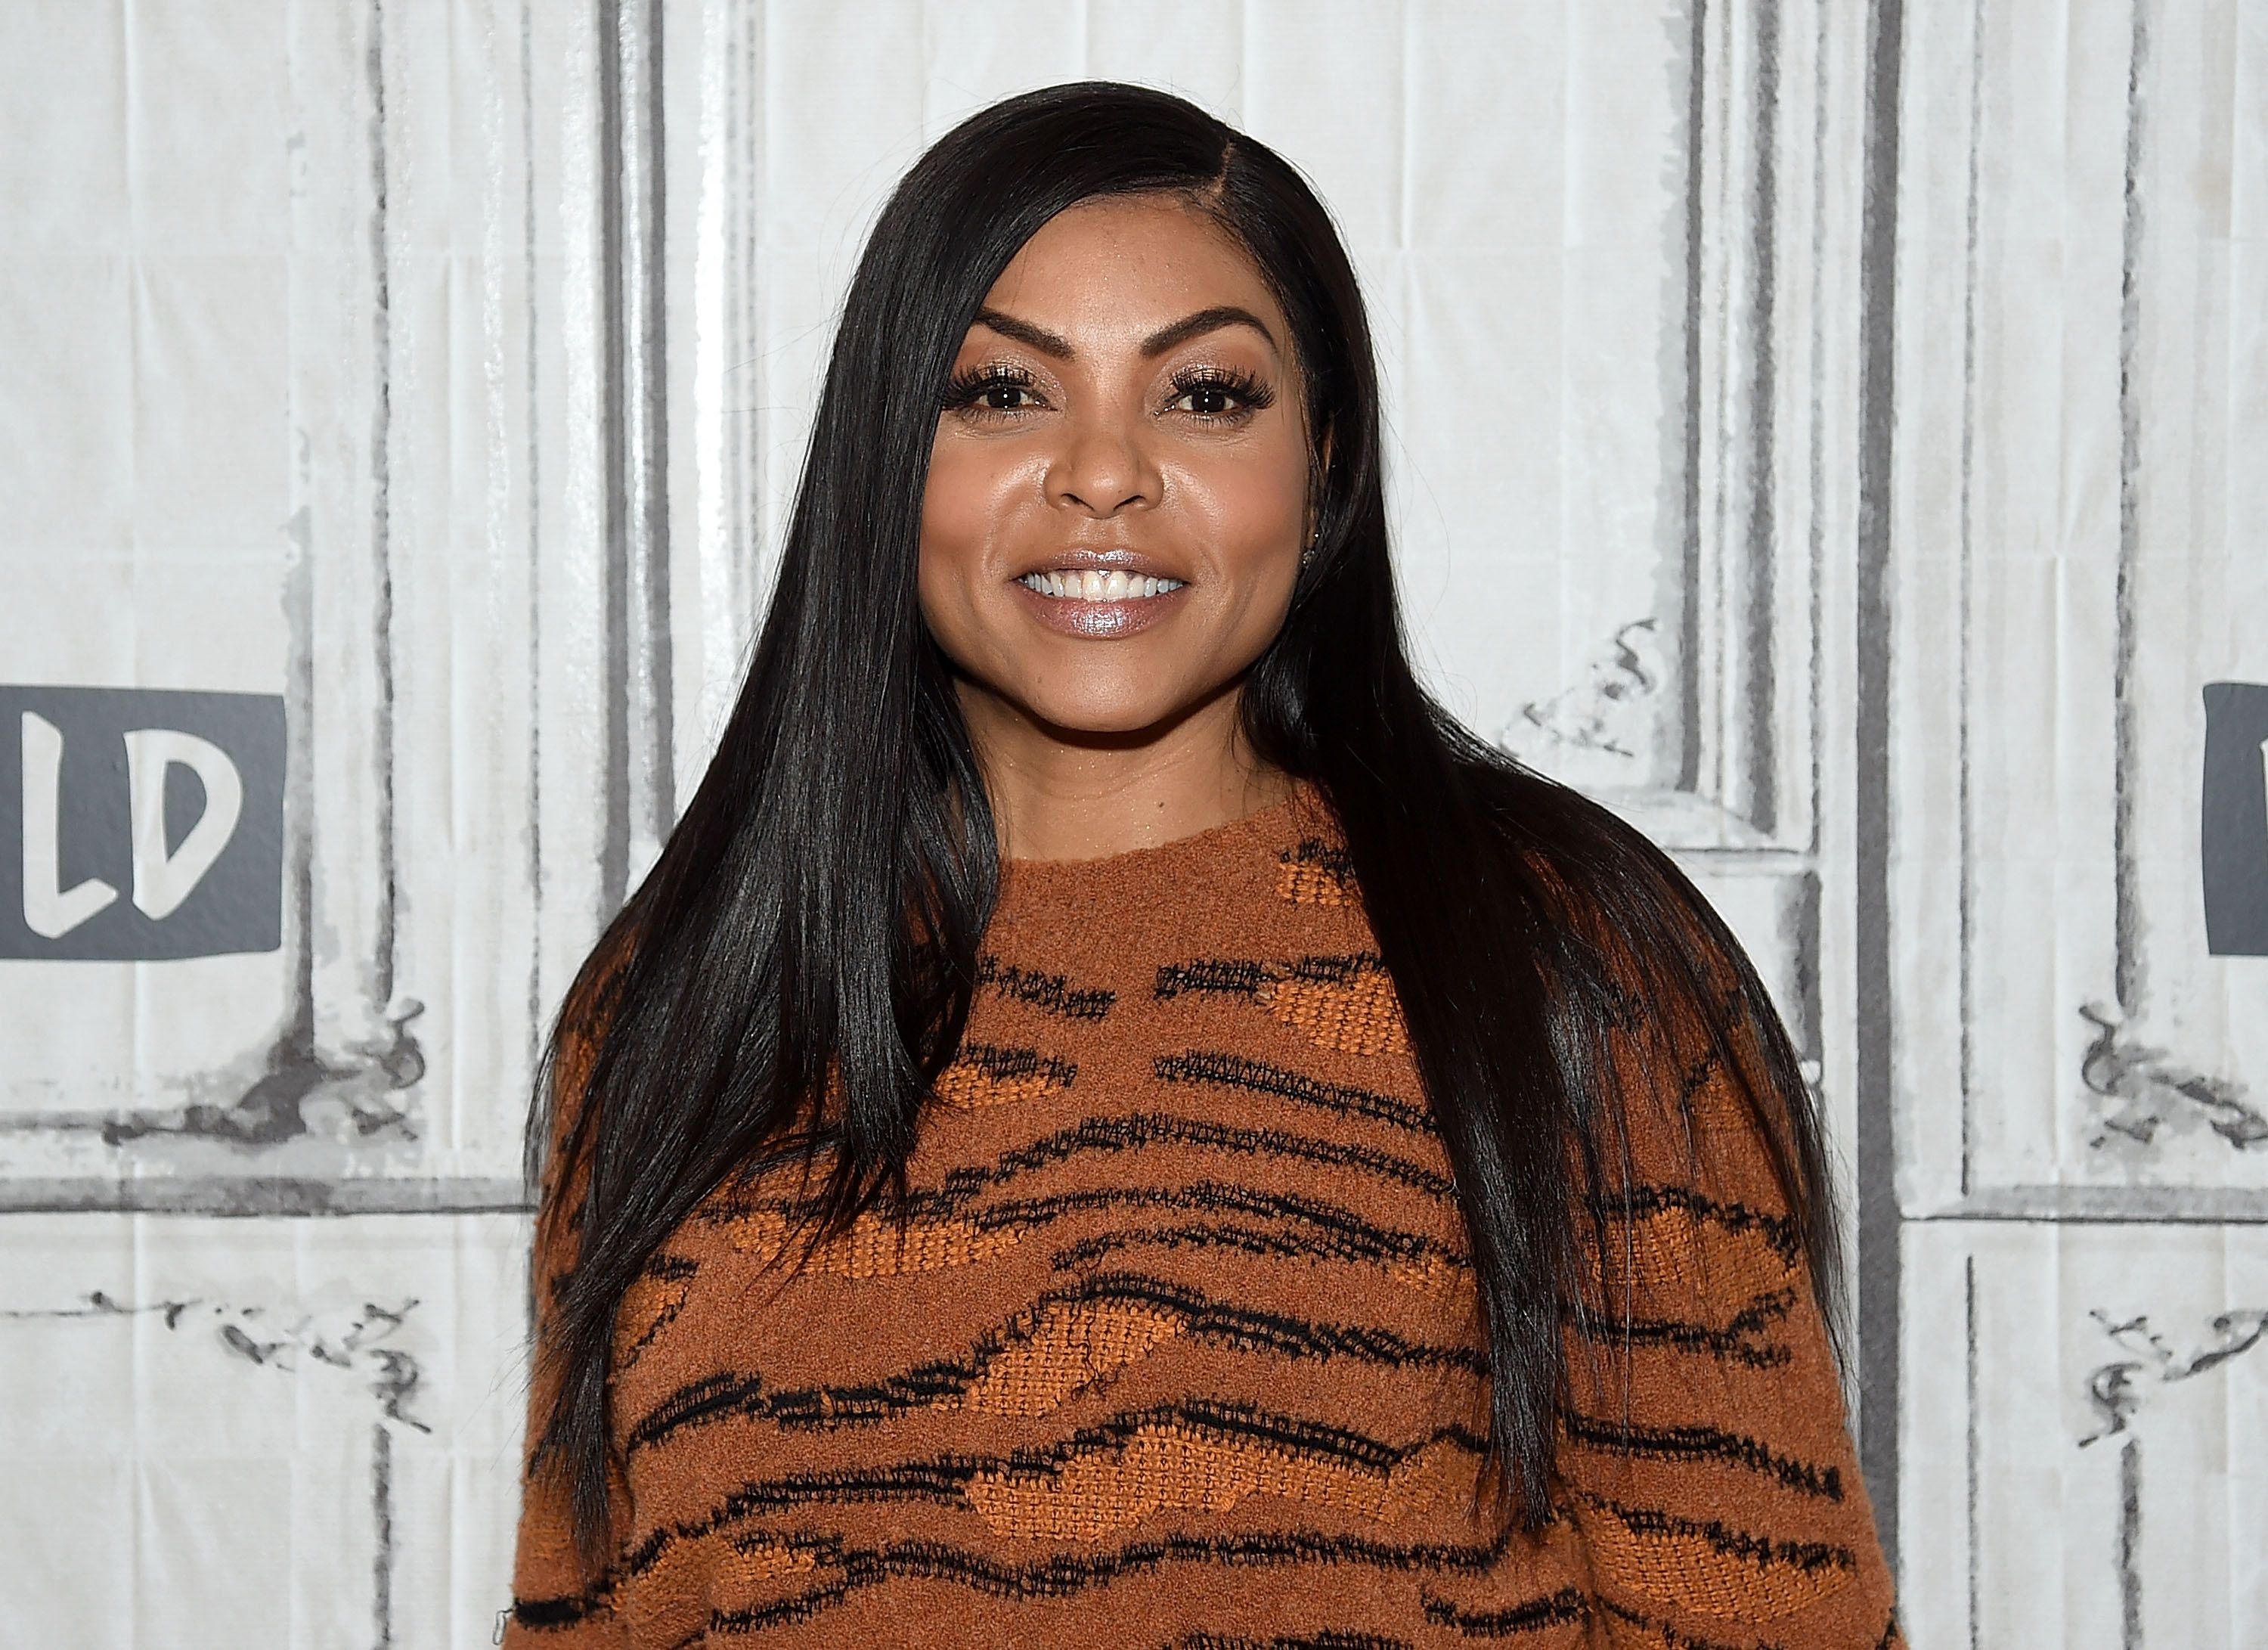 Taraji P. Henson at Build series to discuss her film, "Acrimony" at Build Studio on March 26, 2018 | Photo: Getty Images